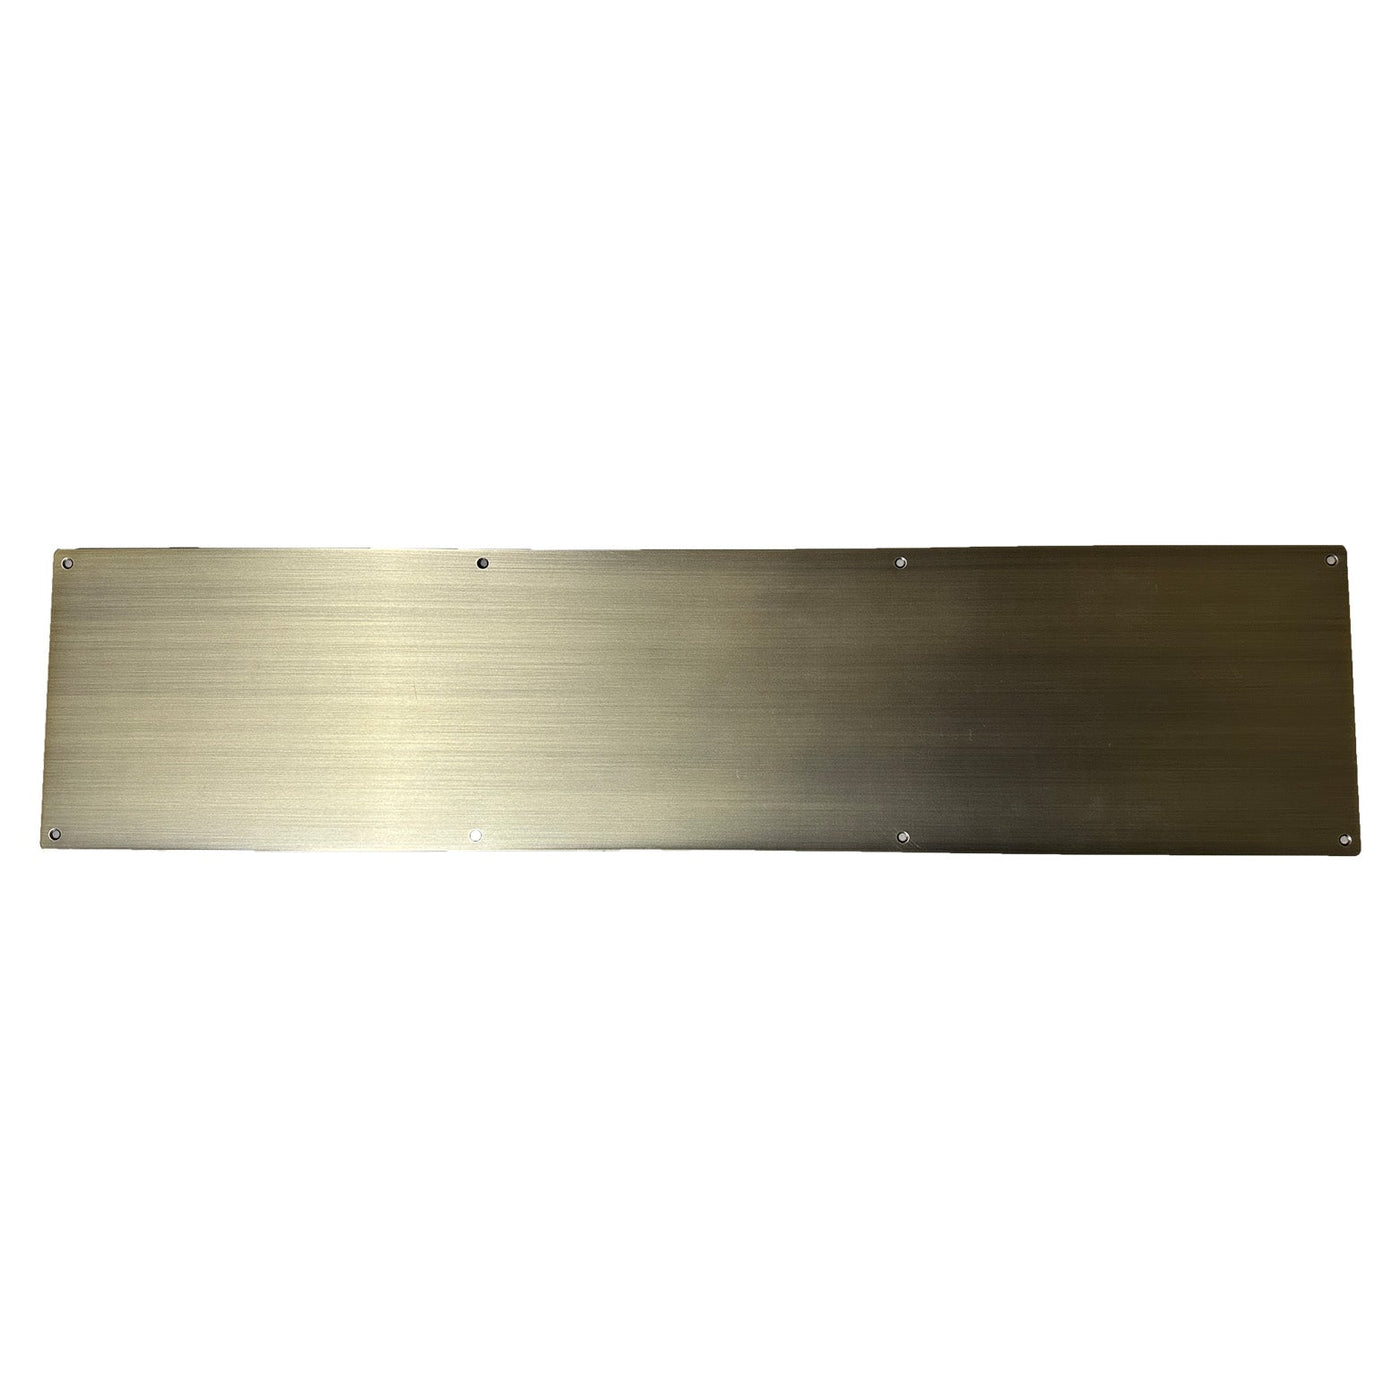 8 Inch x 34 Inch Stainless Steel Kick Plate (Antique Brass Finish)